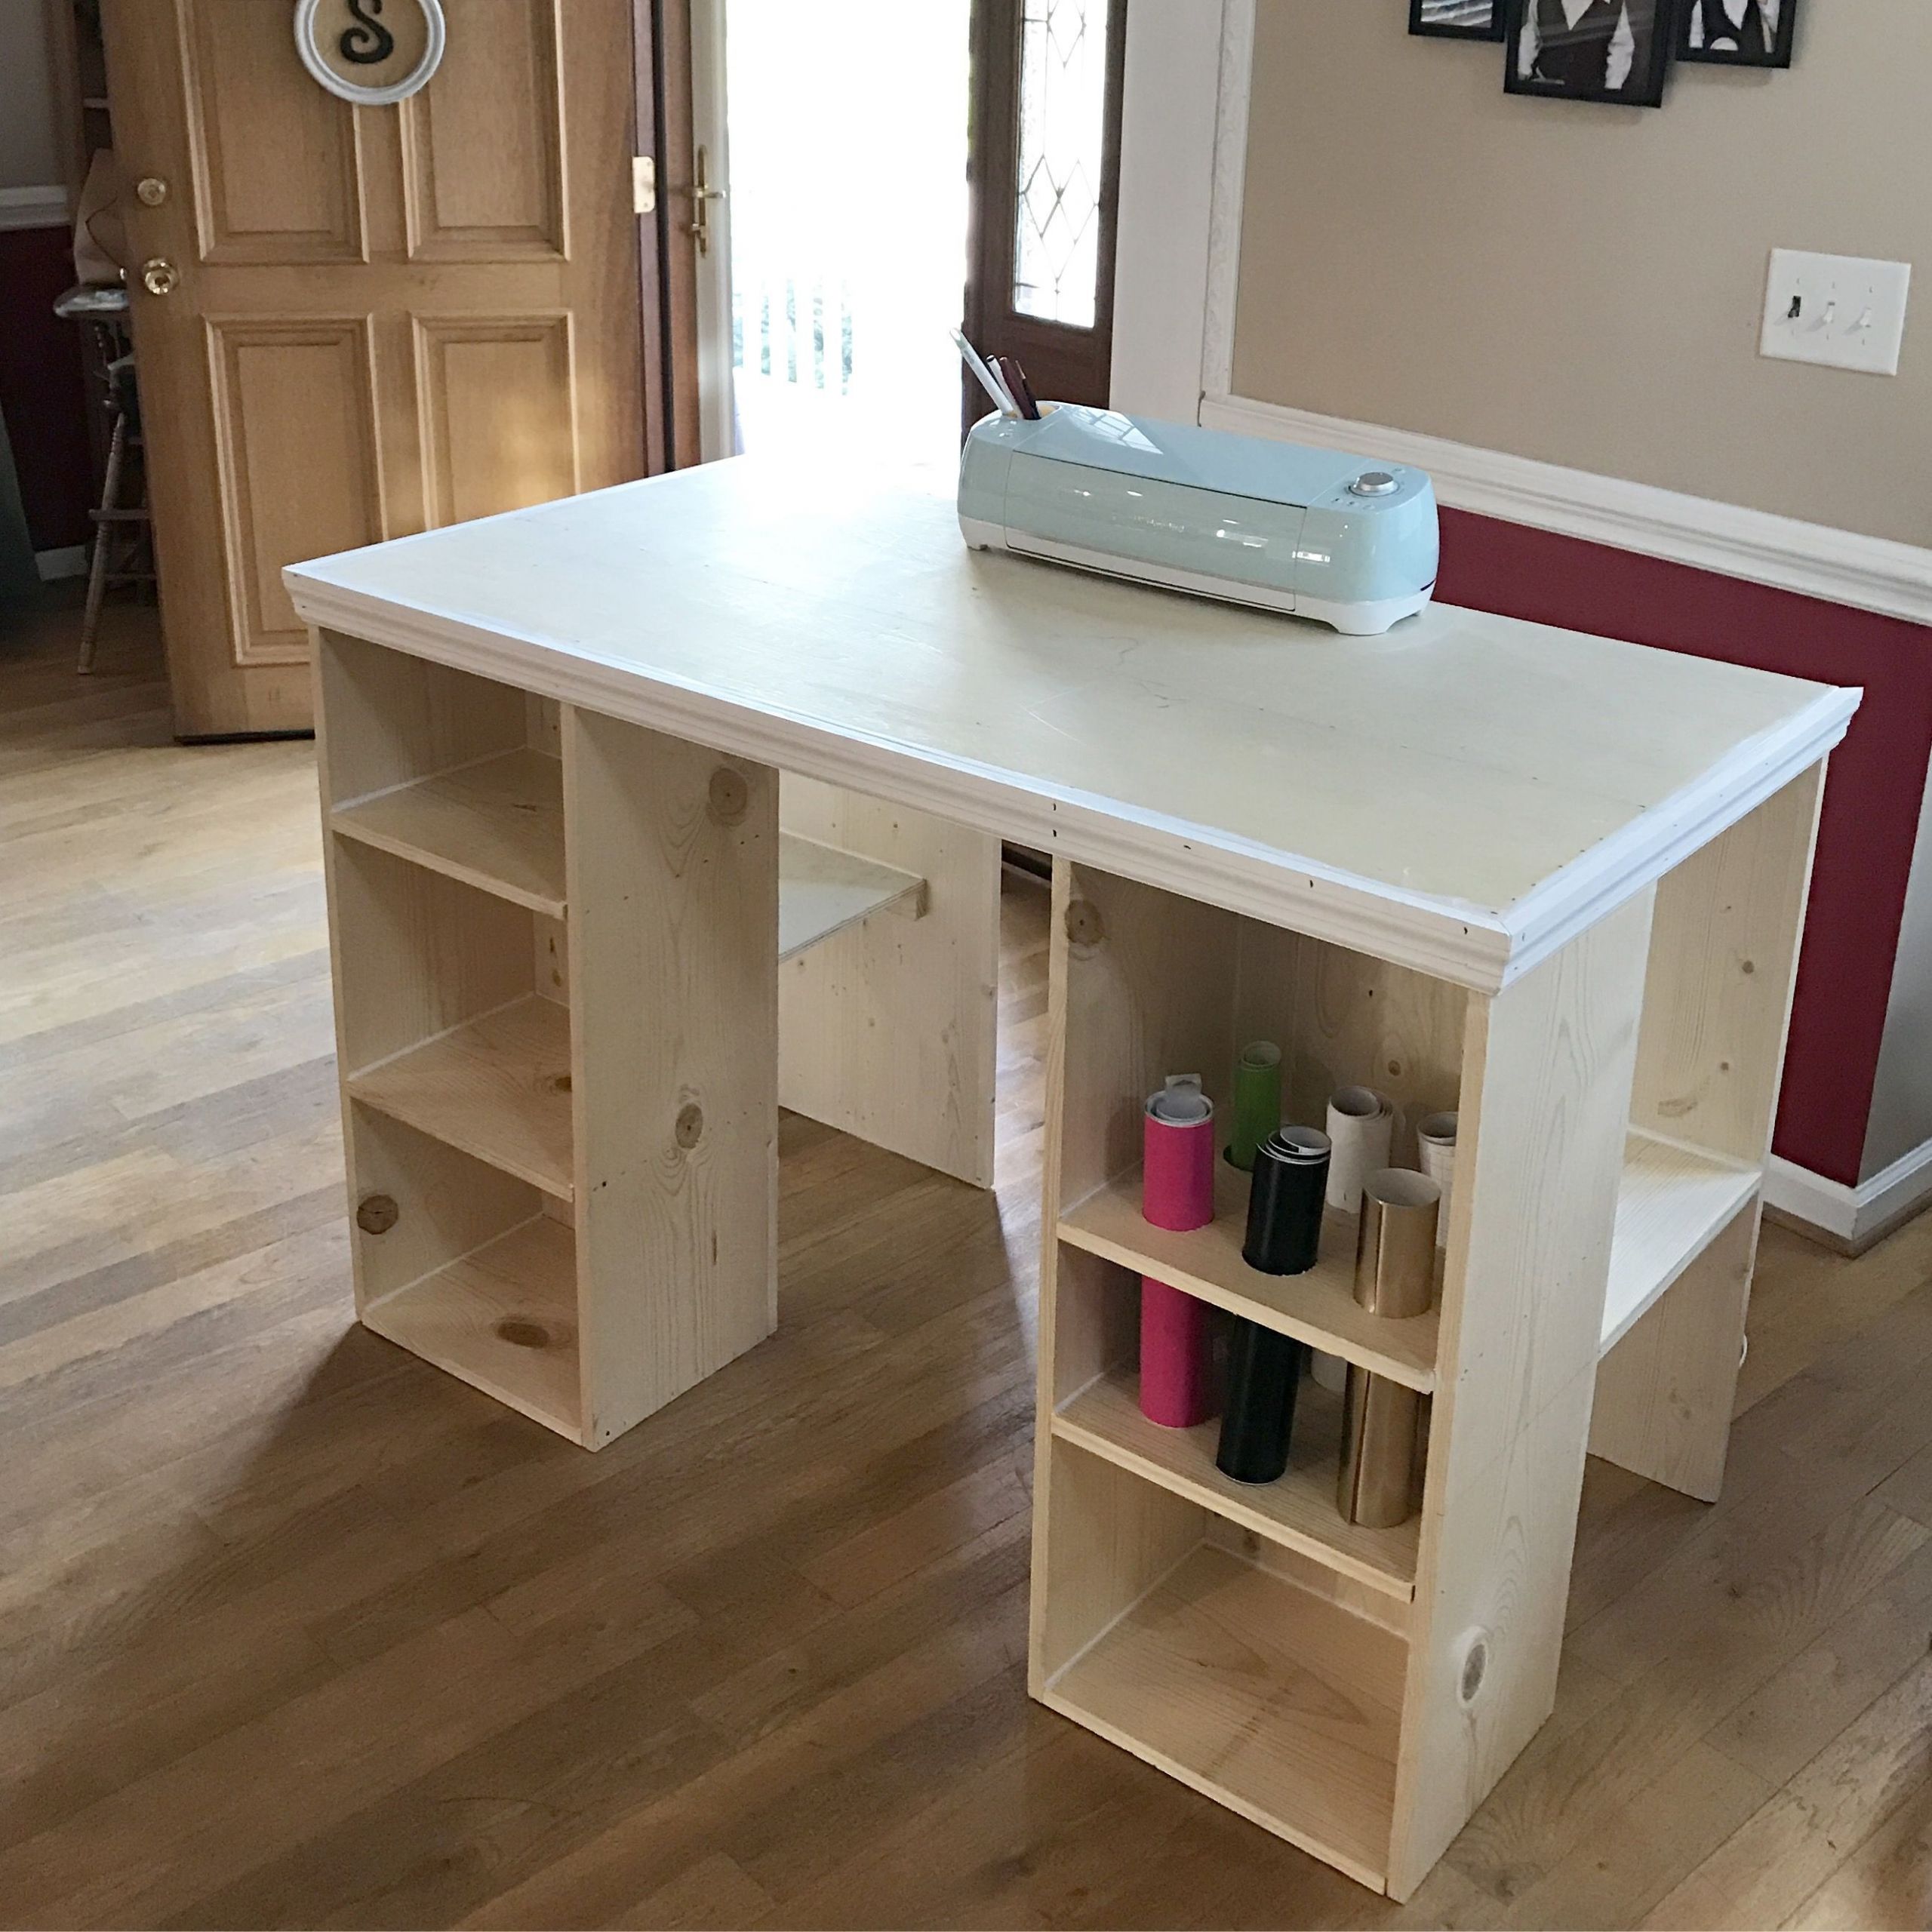 Kids Craft Table Ideas
 DIY Cricut craft table My hubby s awesome just add